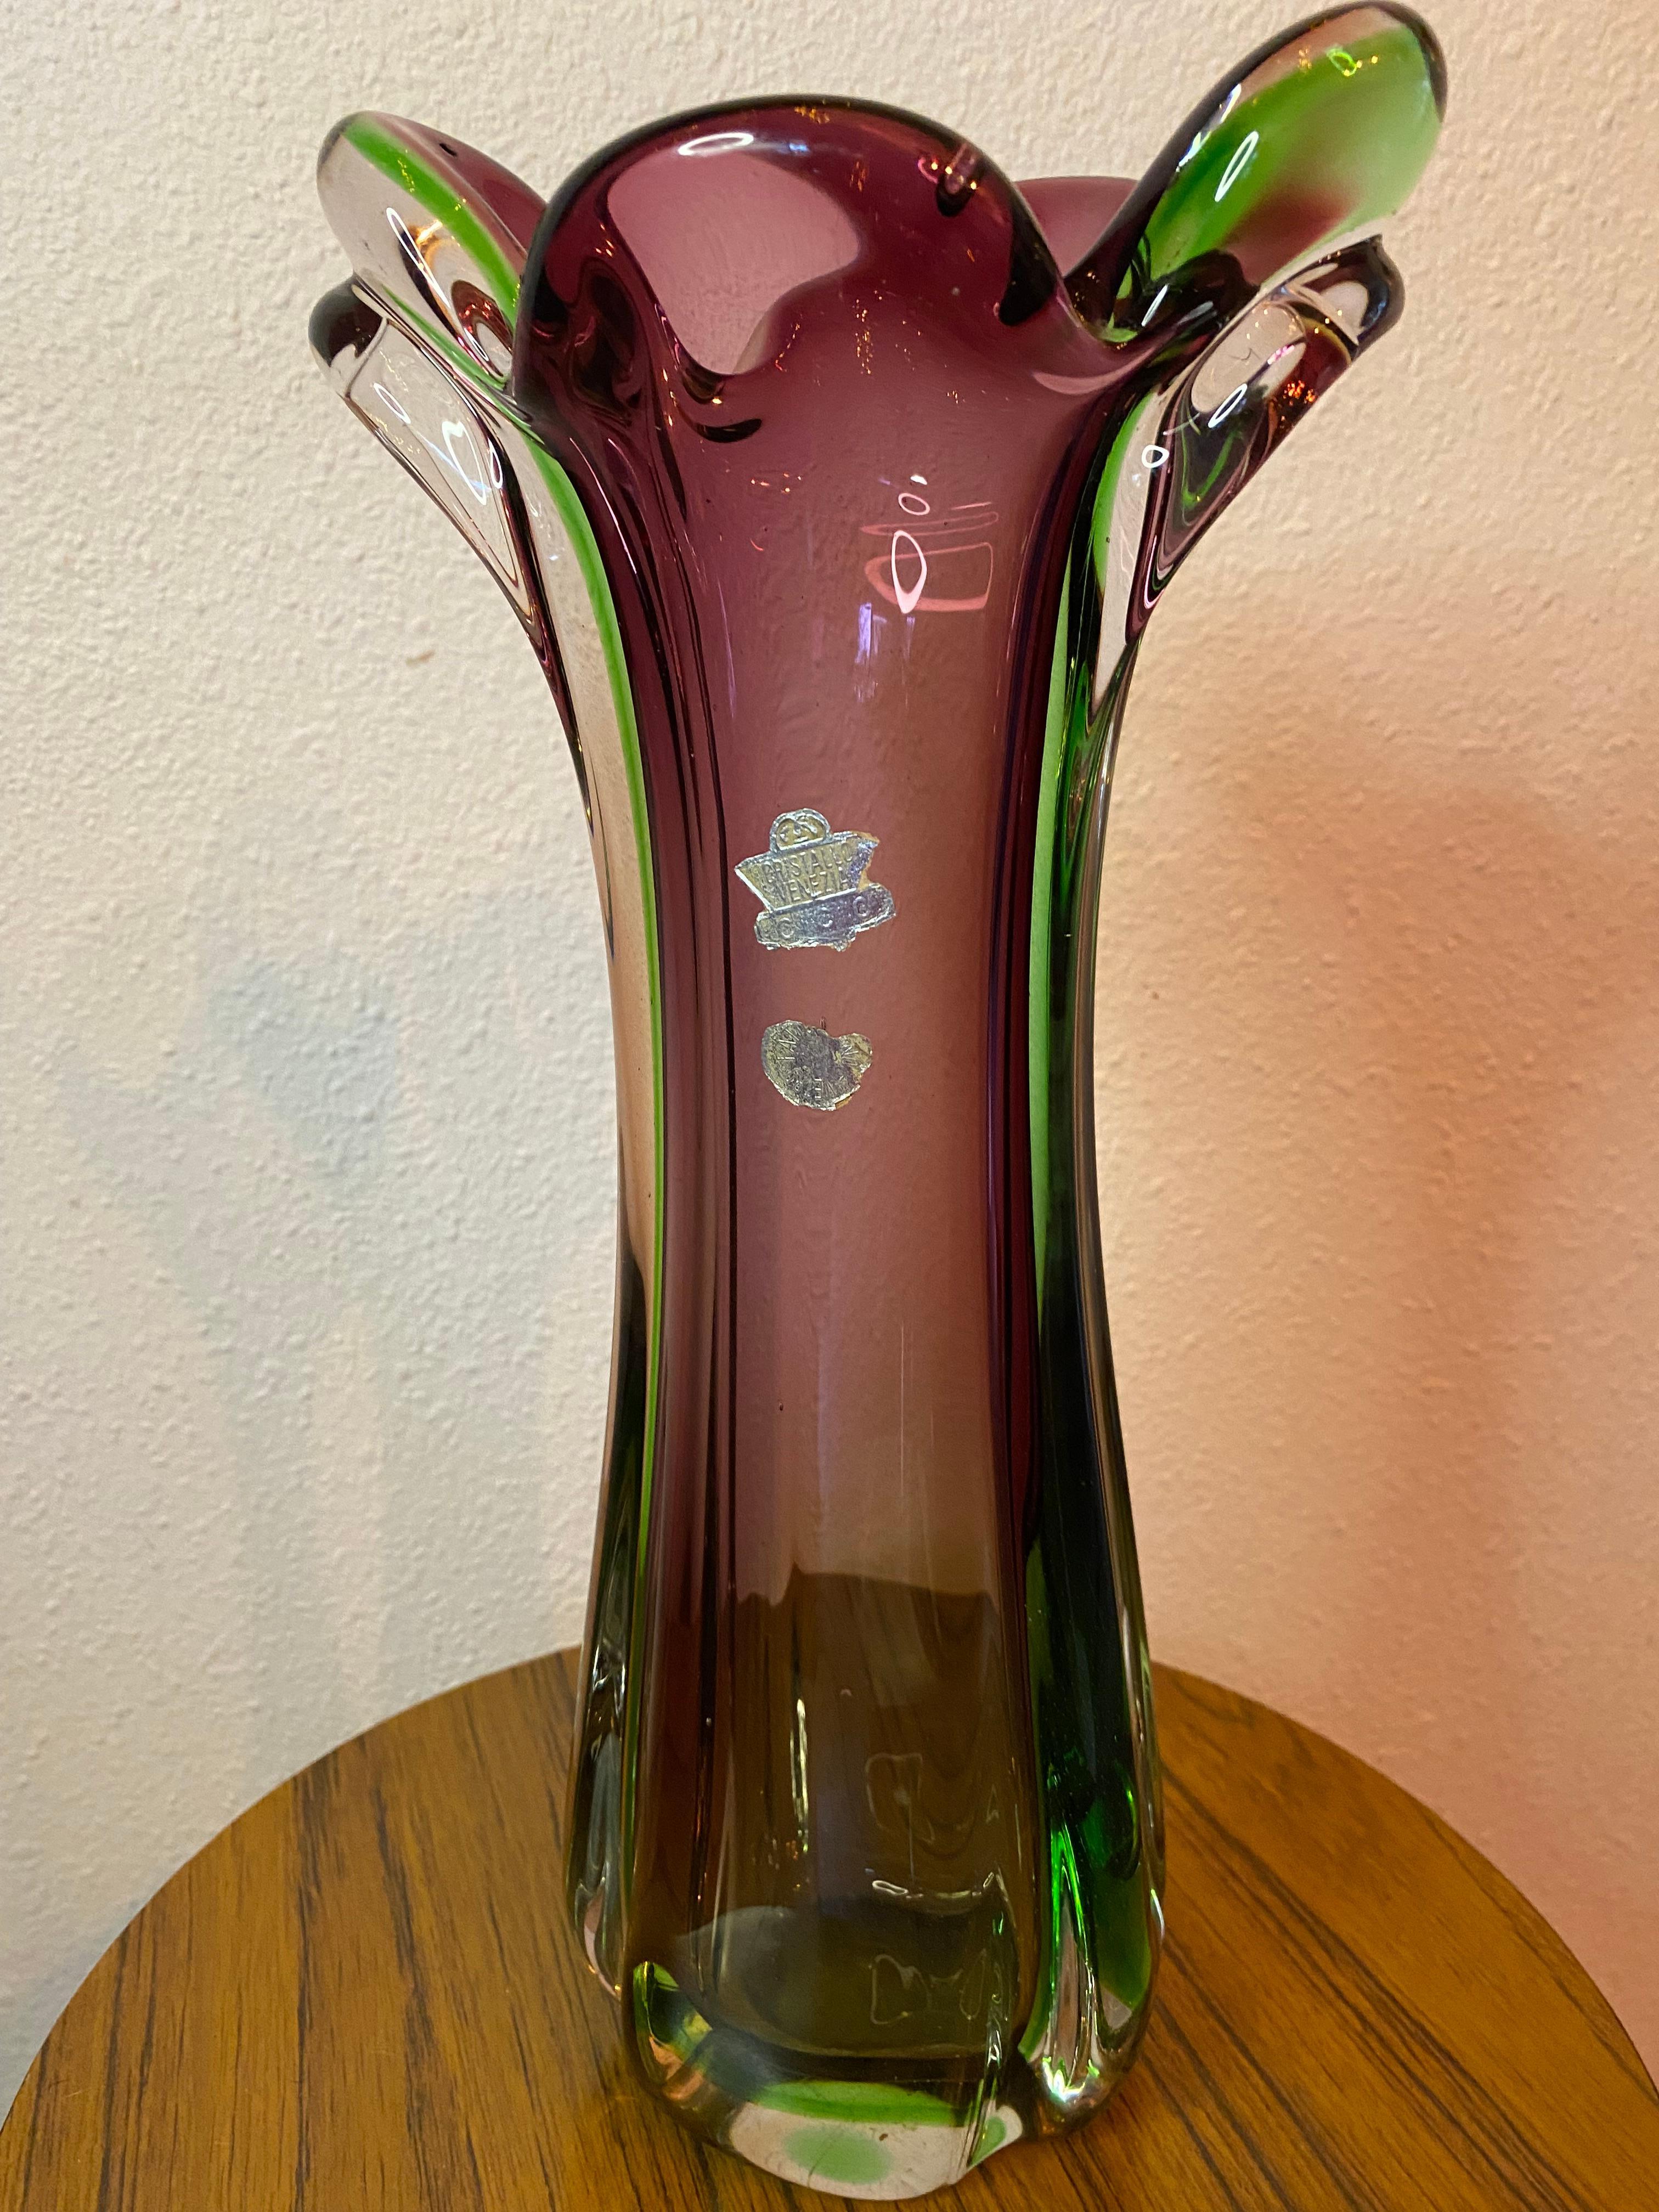 Beautiful purple and green Mid-Century Modern Italian Murano glass vase.
This piece is a tall one and the weight is 2 kilos 